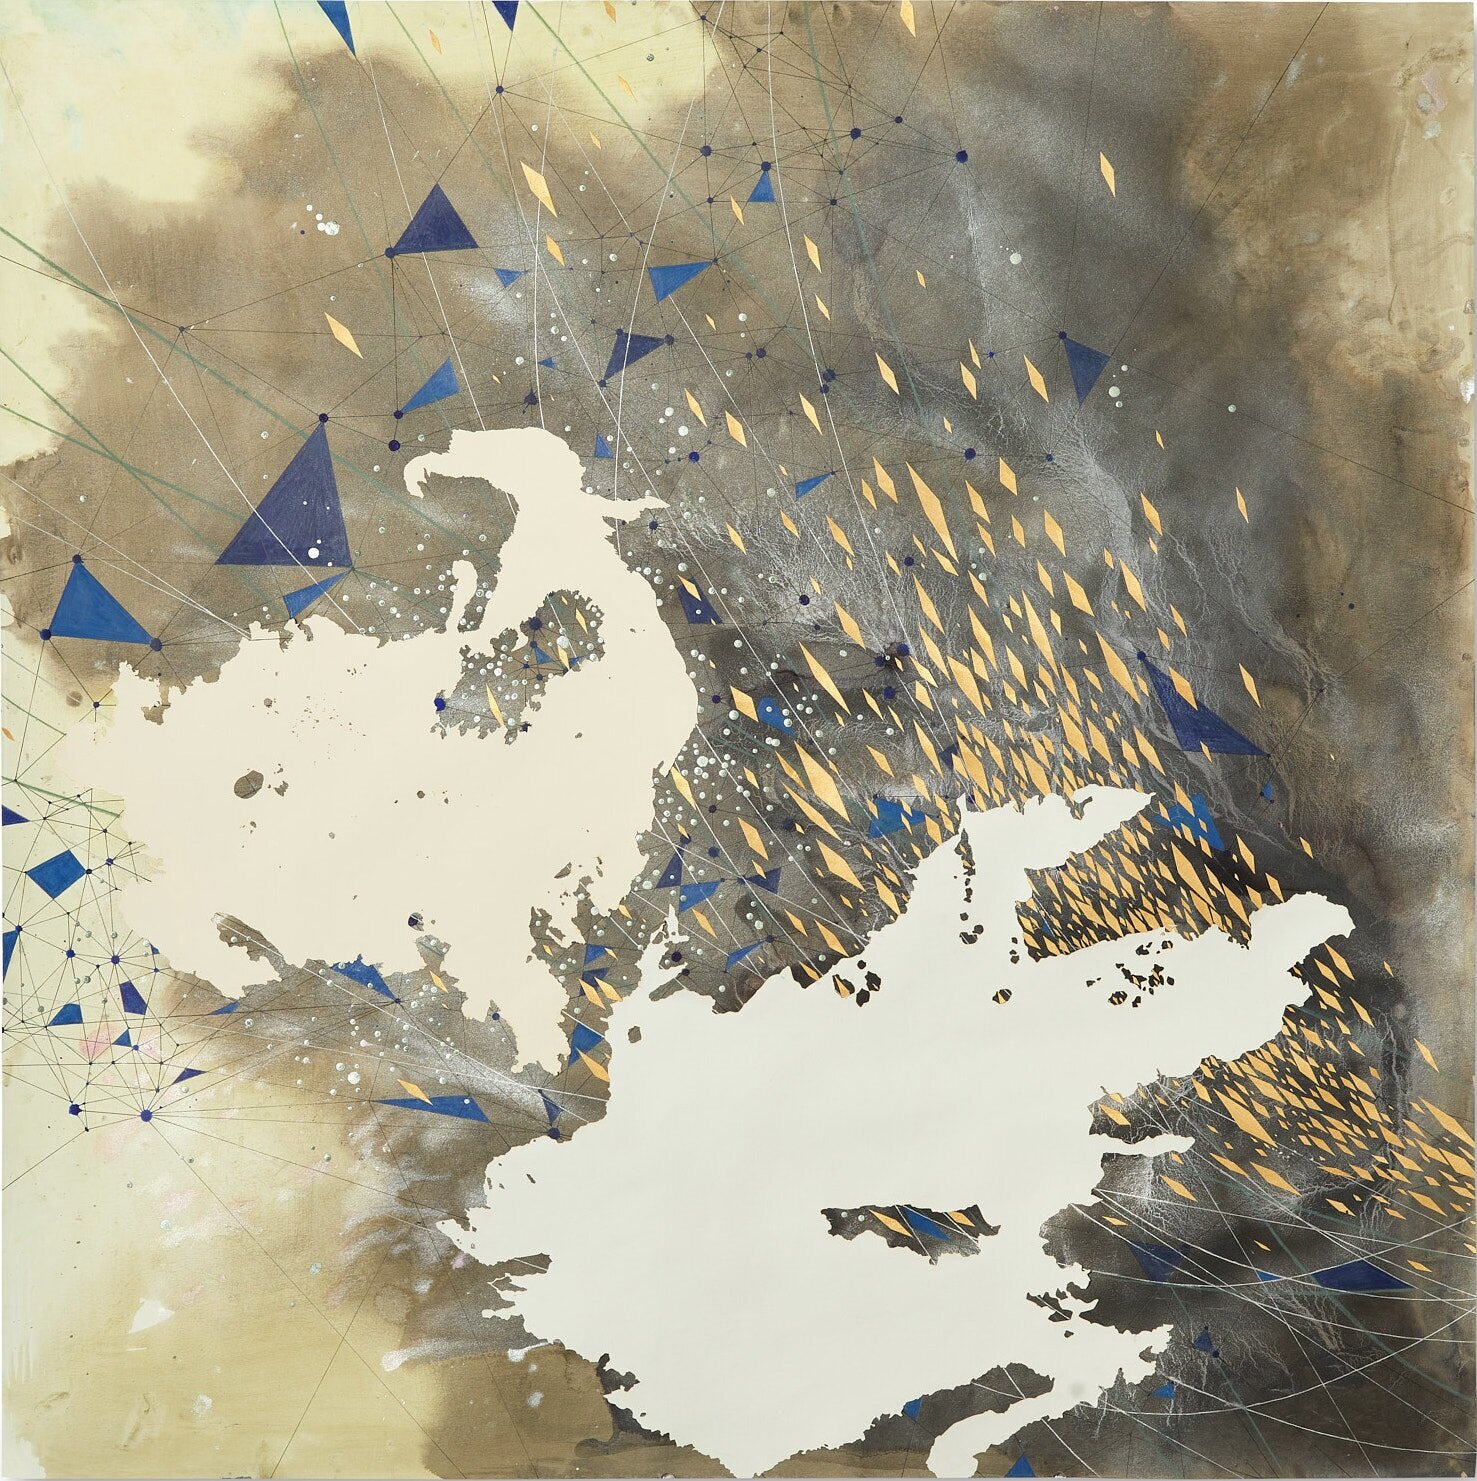  Val Britton,  Reverberation #74 , 2021, acrylic, ink, and collage on paper 36 x 36 inches (91.4 x 91.4 cm) 